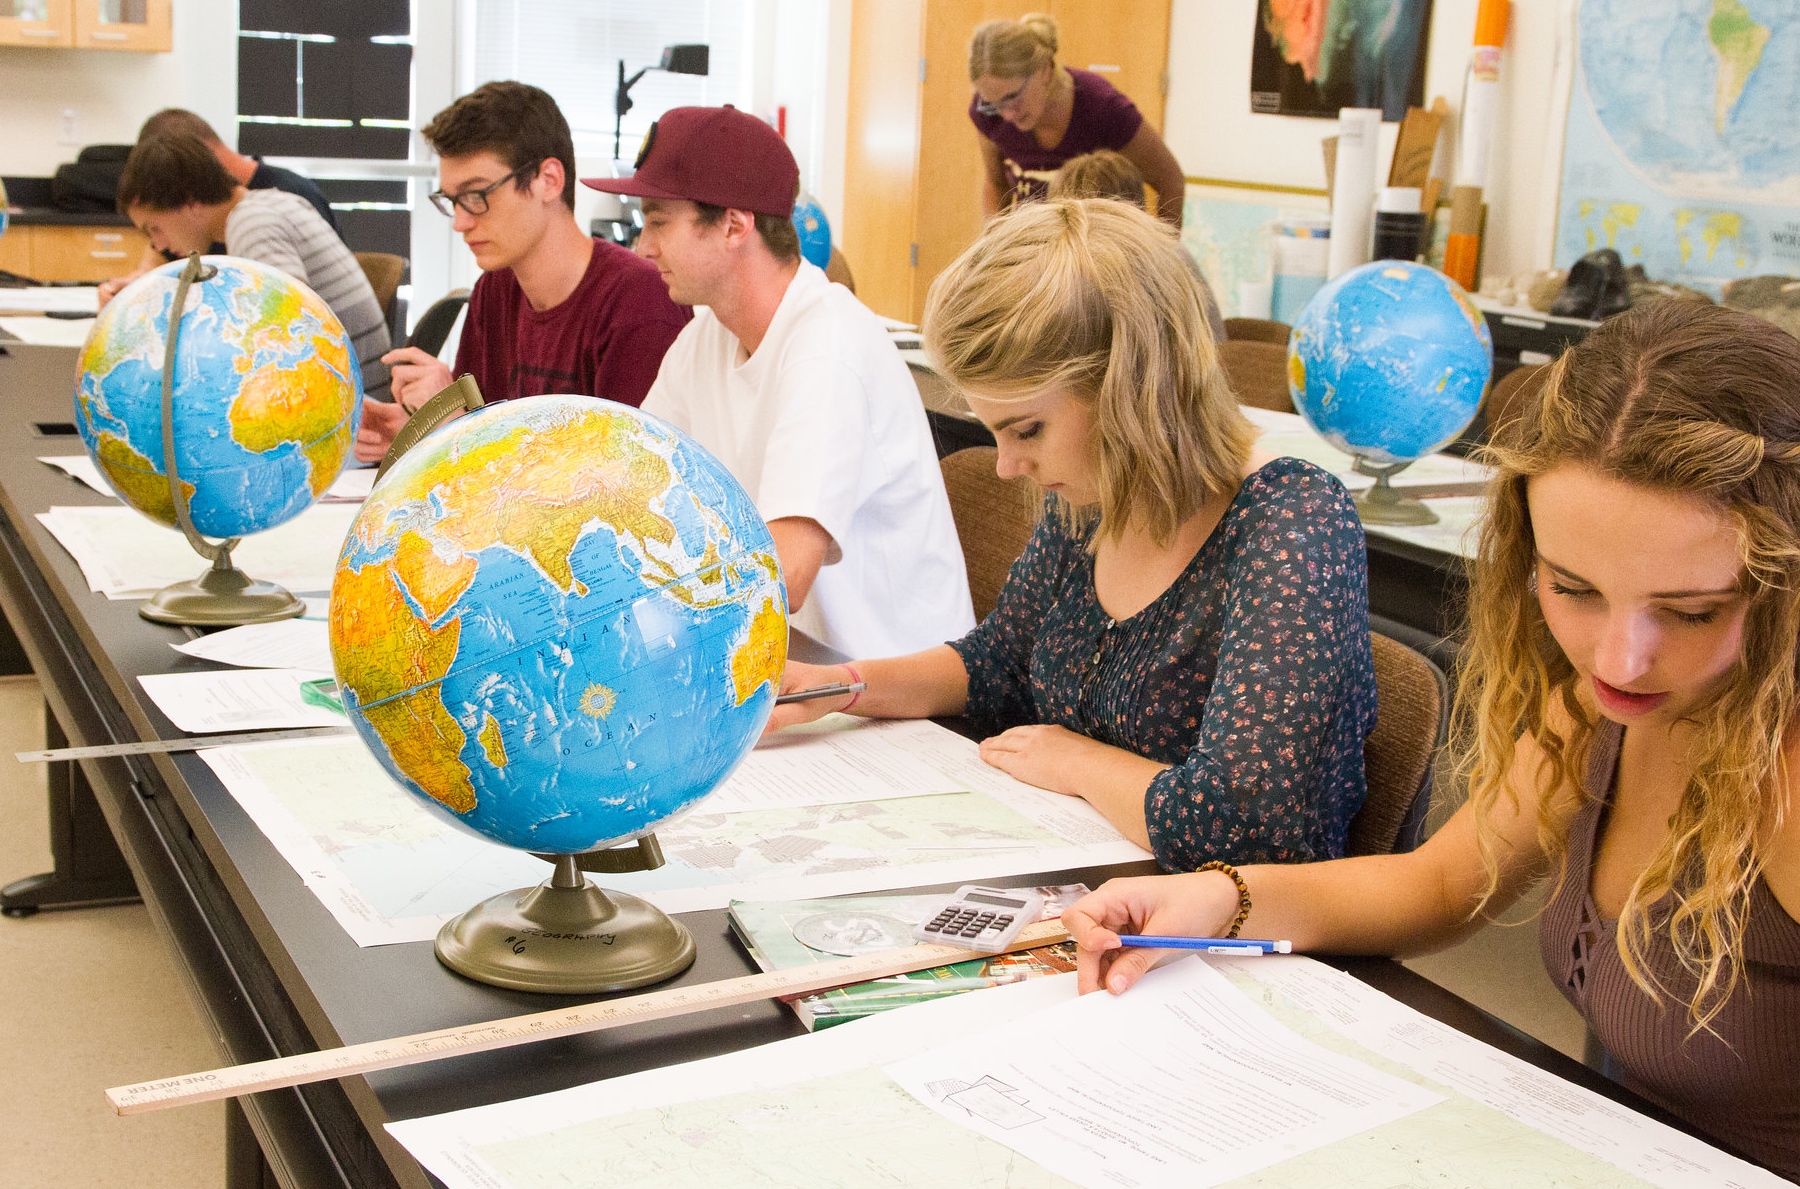 Students at table studying globes in class.